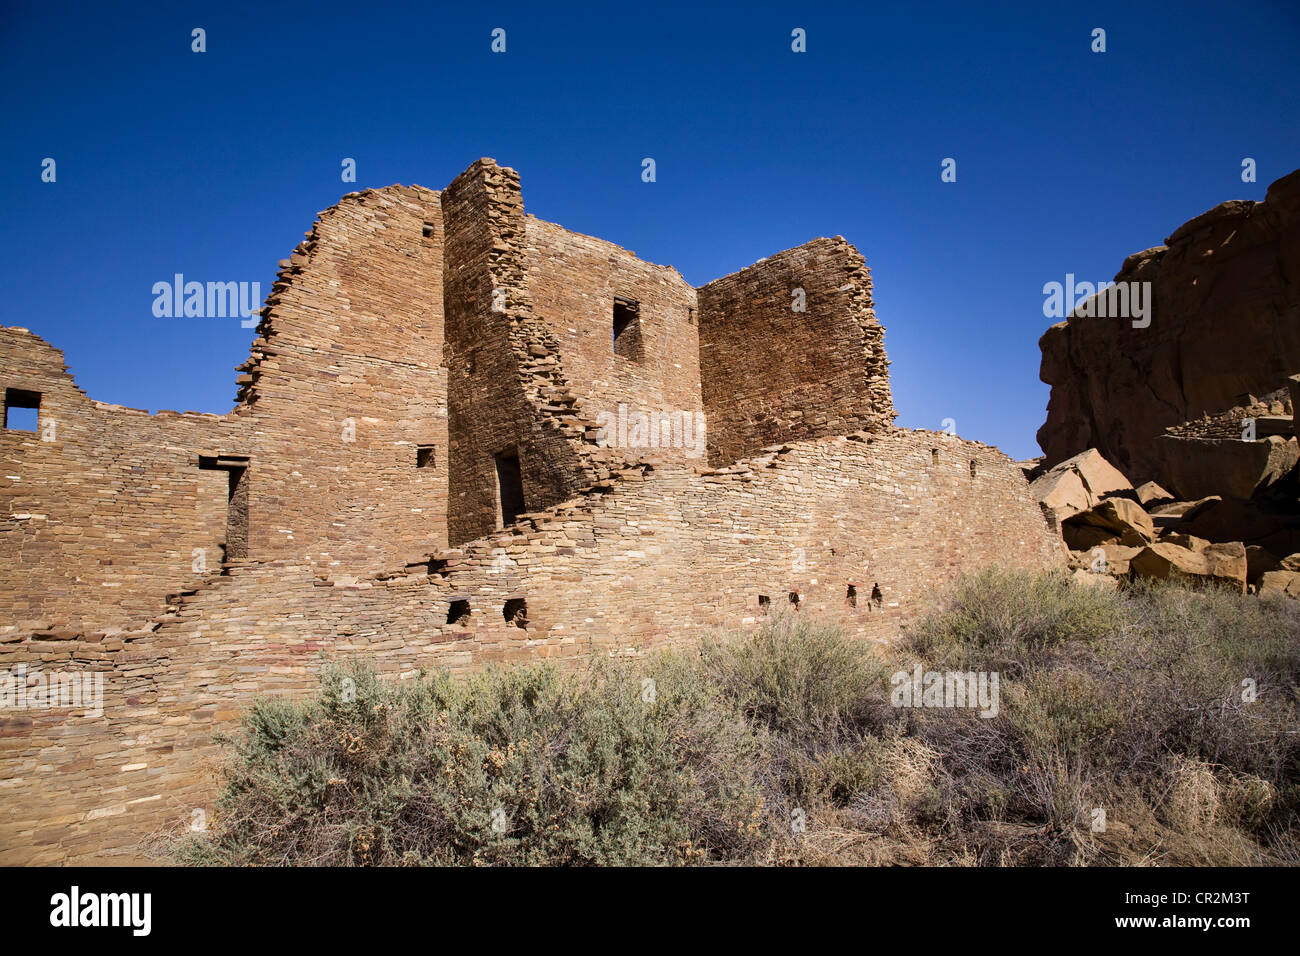 The sandstone walls of the Anasazi great house of Pueblo Bonito, Chaco Canyon National Historical Park, New Mexico Stock Photo